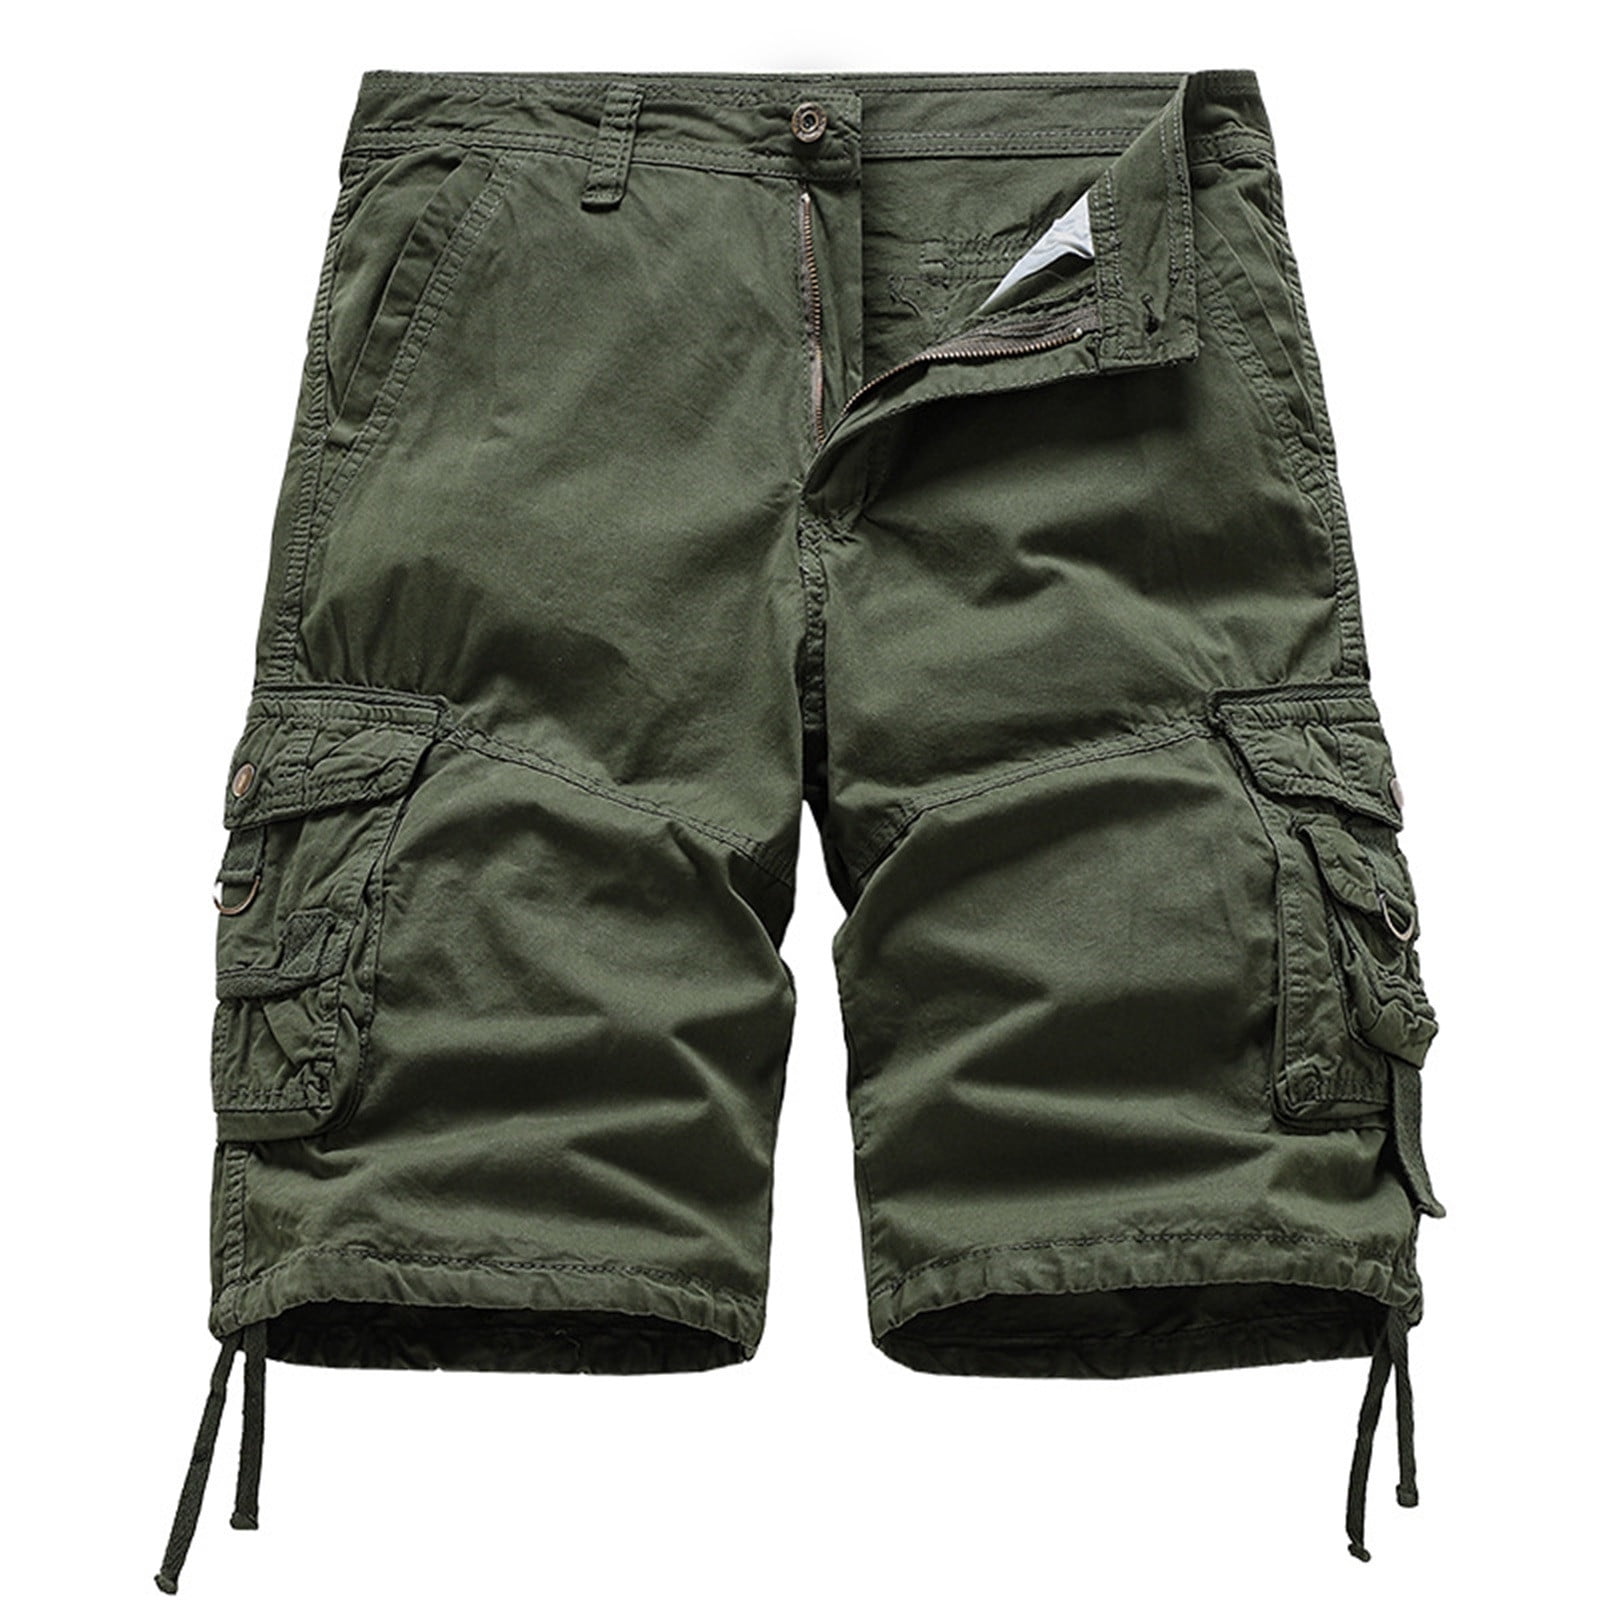 AdBFJAF Cargo Pants for Men Big and Tall Men's Cargo Short Casual Cotton Shorts Work Short for ...